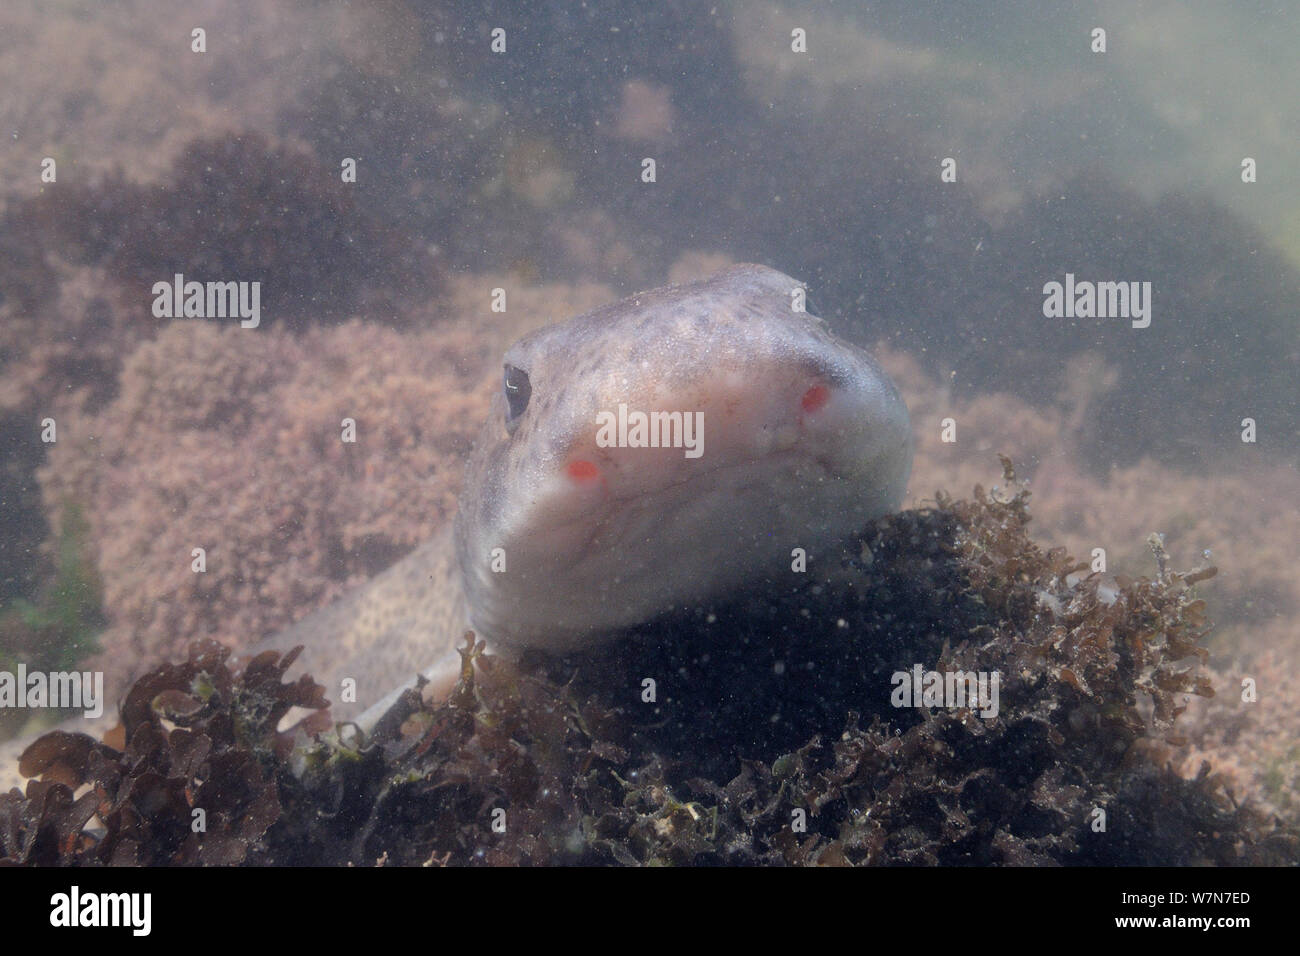 Close up head-on view of a Lesser spotted catshark / Dogfish (Scyliorhinus canicula) resting on floor of a rockpool low on the shore. Rhossili, The Gower peninsula, UK, July. Stock Photo